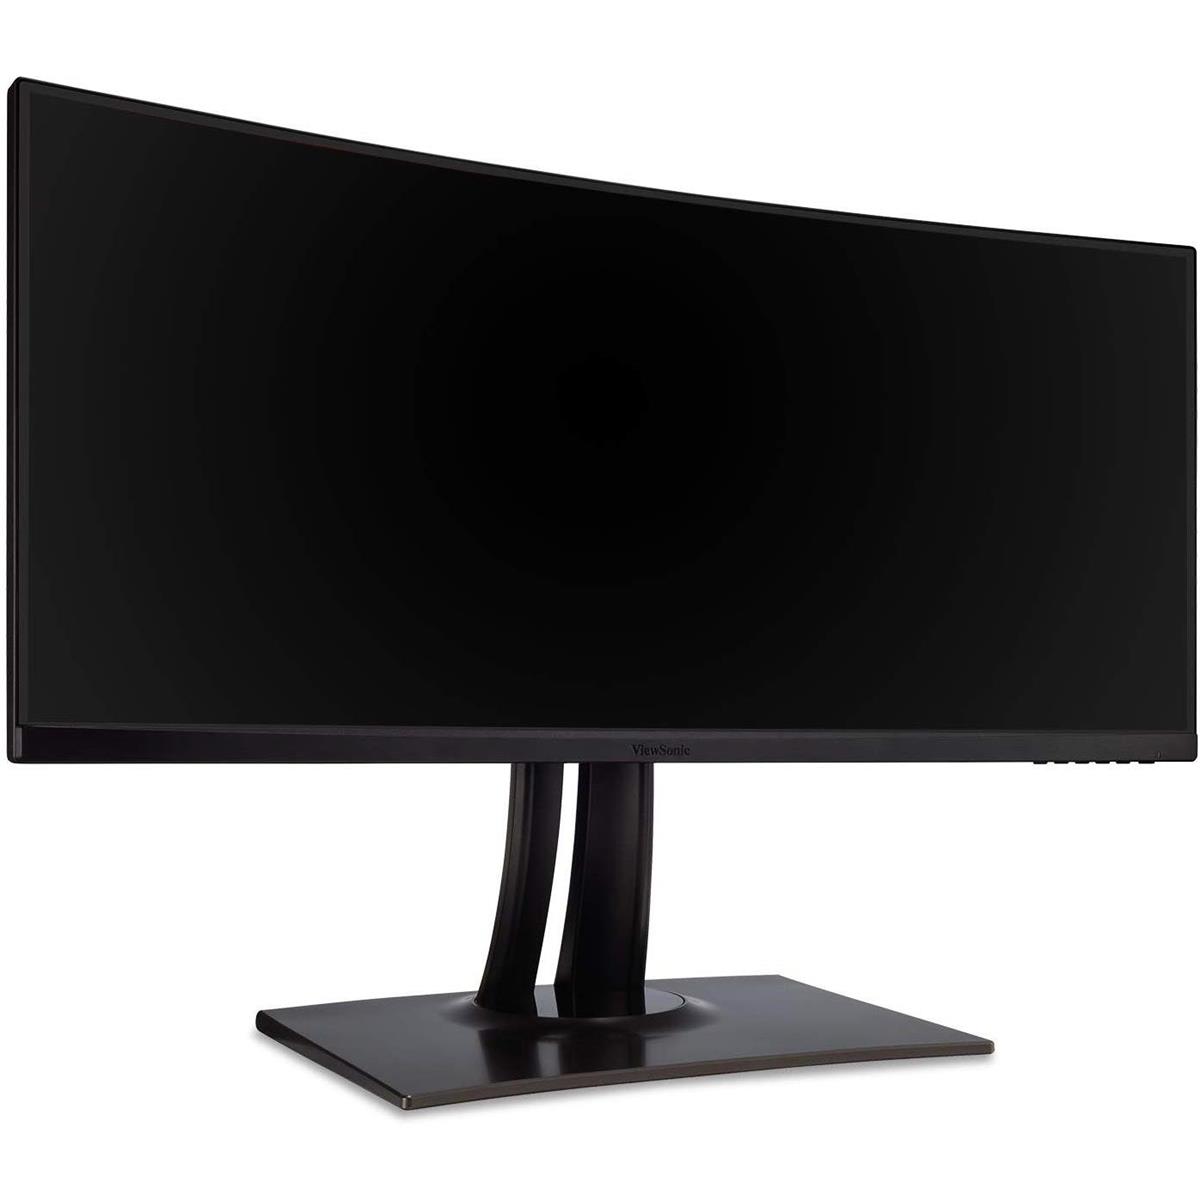 monitor for video editing 2 image 